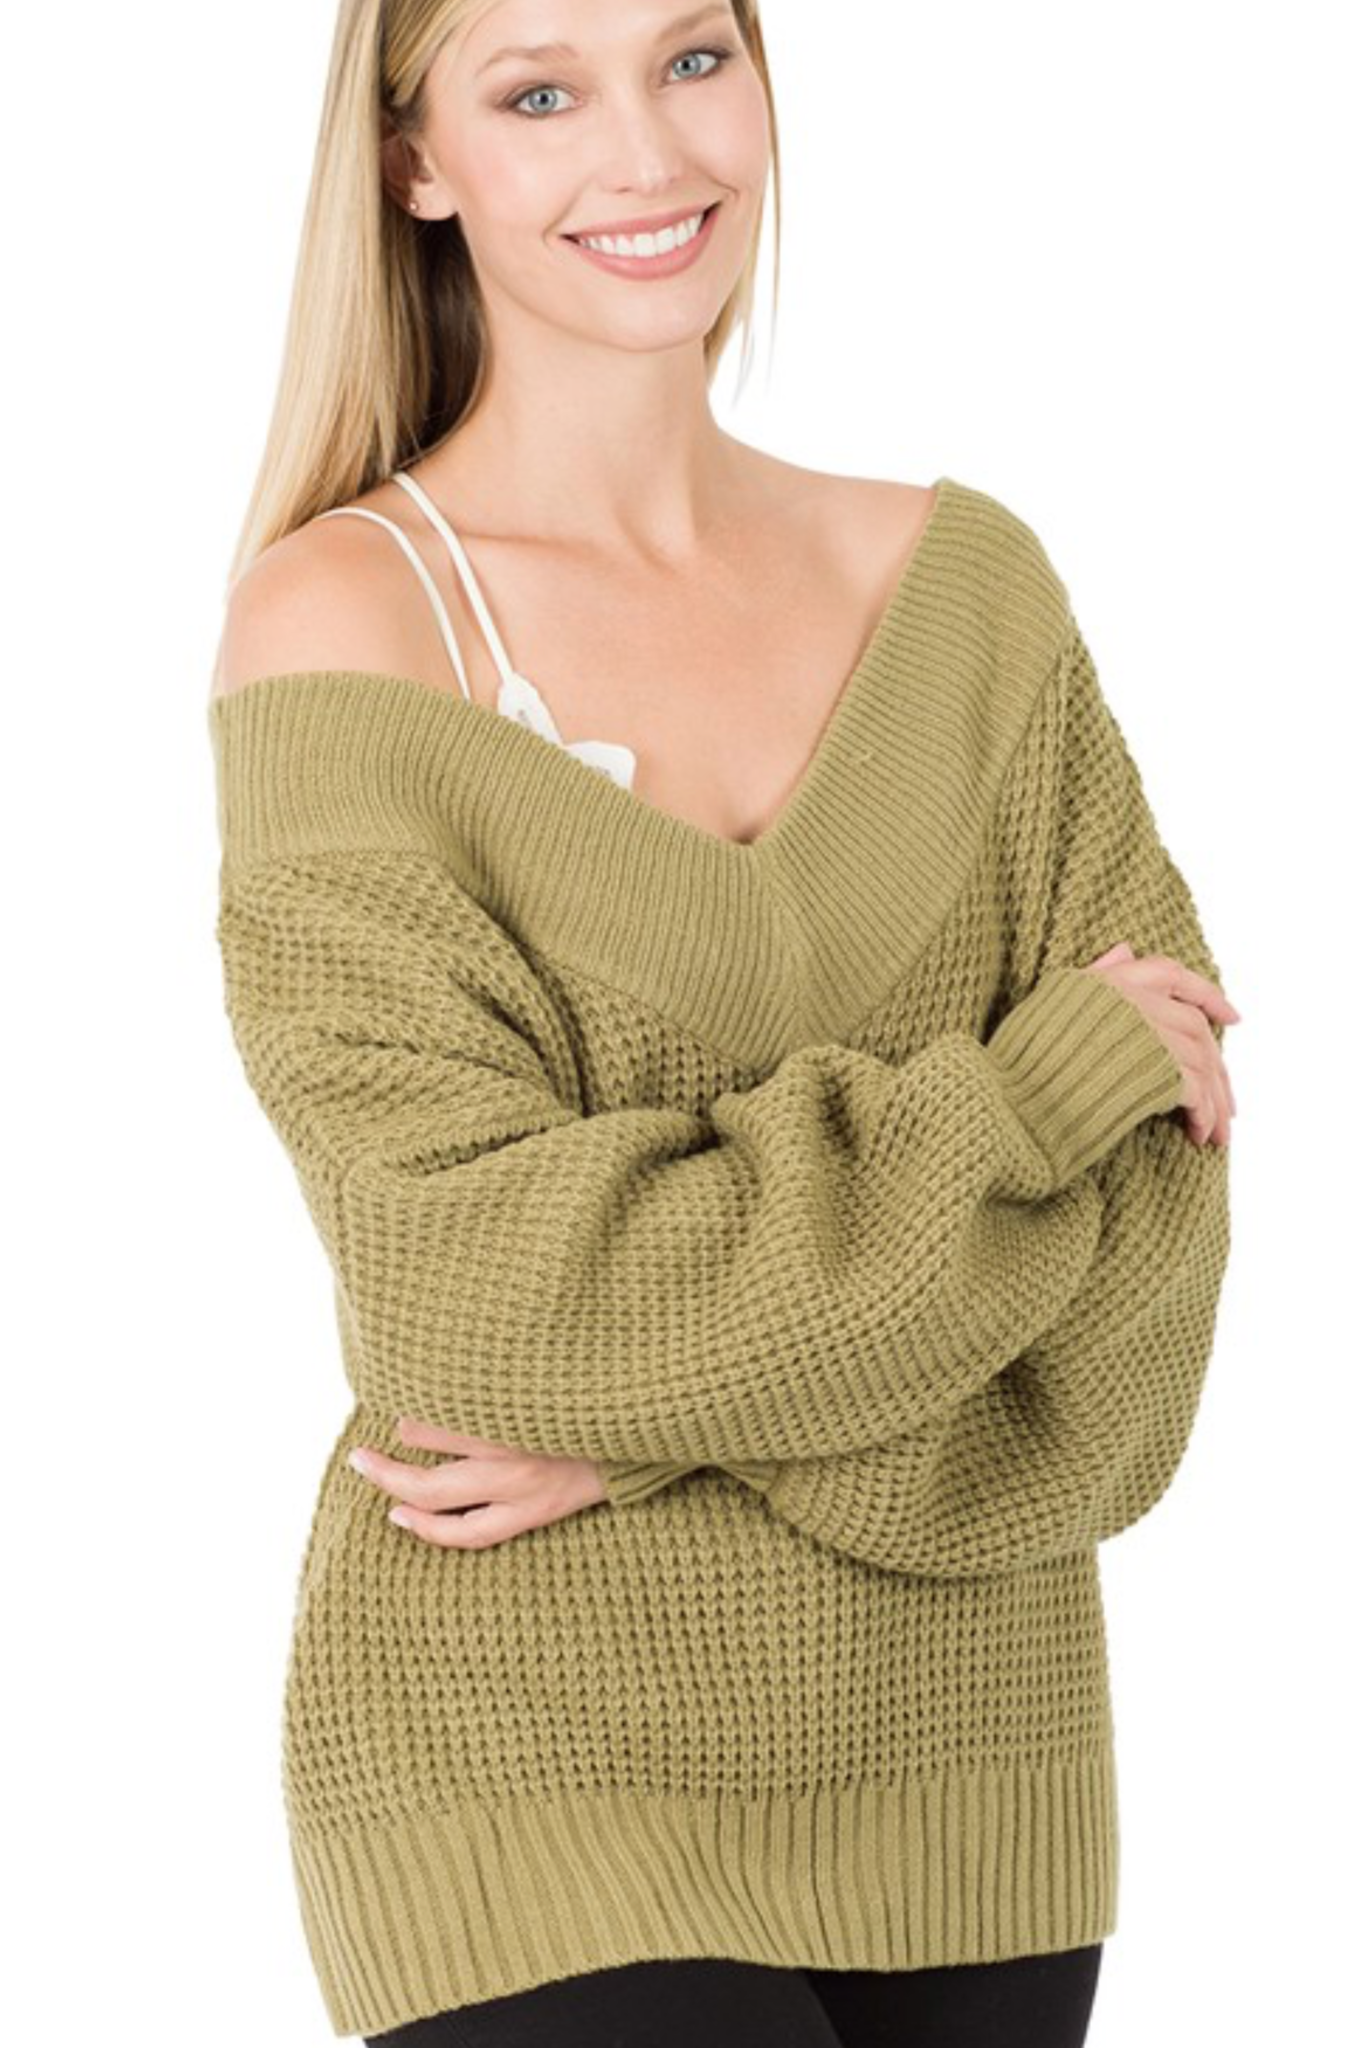 Our Love and Adored Sweater is the perfect casual top for every day wear. It features a deep V-neckline for off the shoulder wear, and a chunky knit material to keep you warm all winter long!